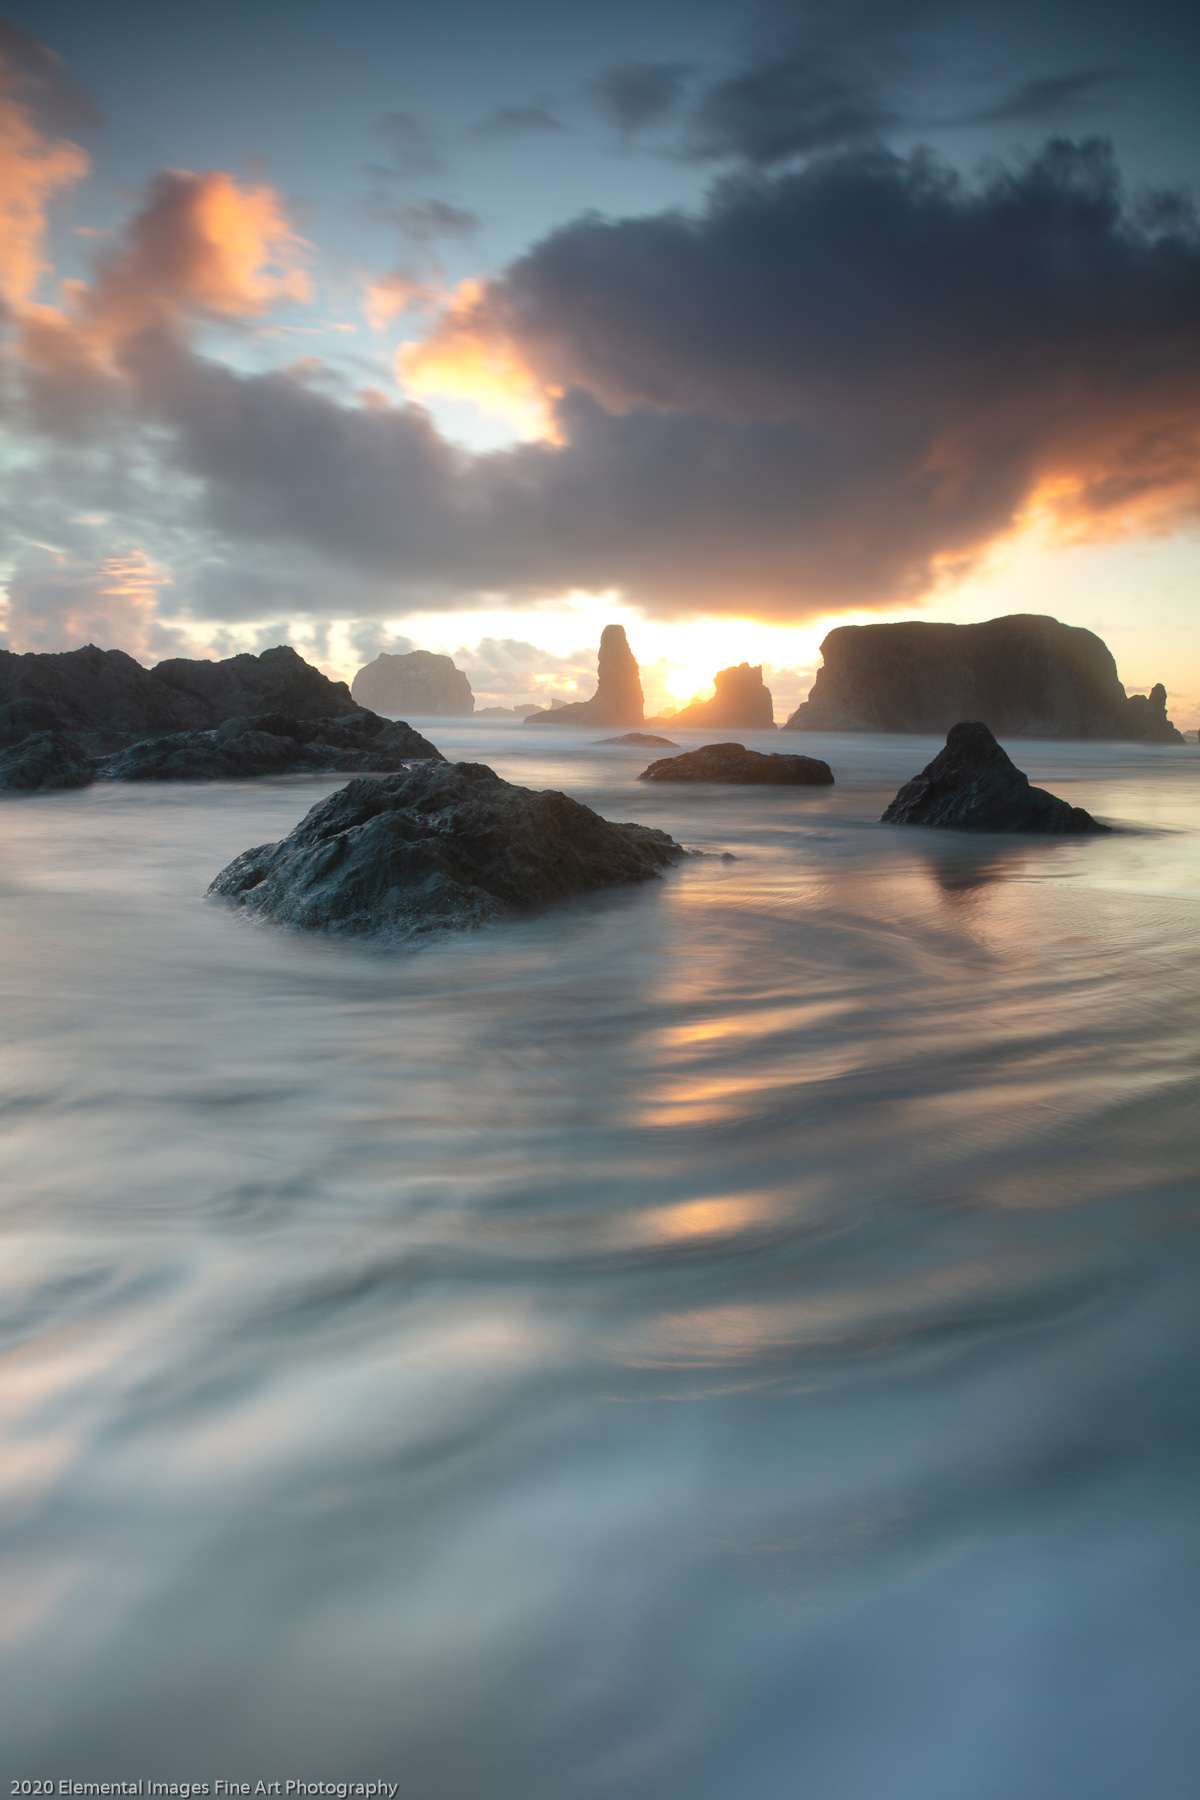 Life's a Beach | Bandon | OR | USA - © 2020 Elemental Images Fine Art Photography - All Rights Reserved Worldwide